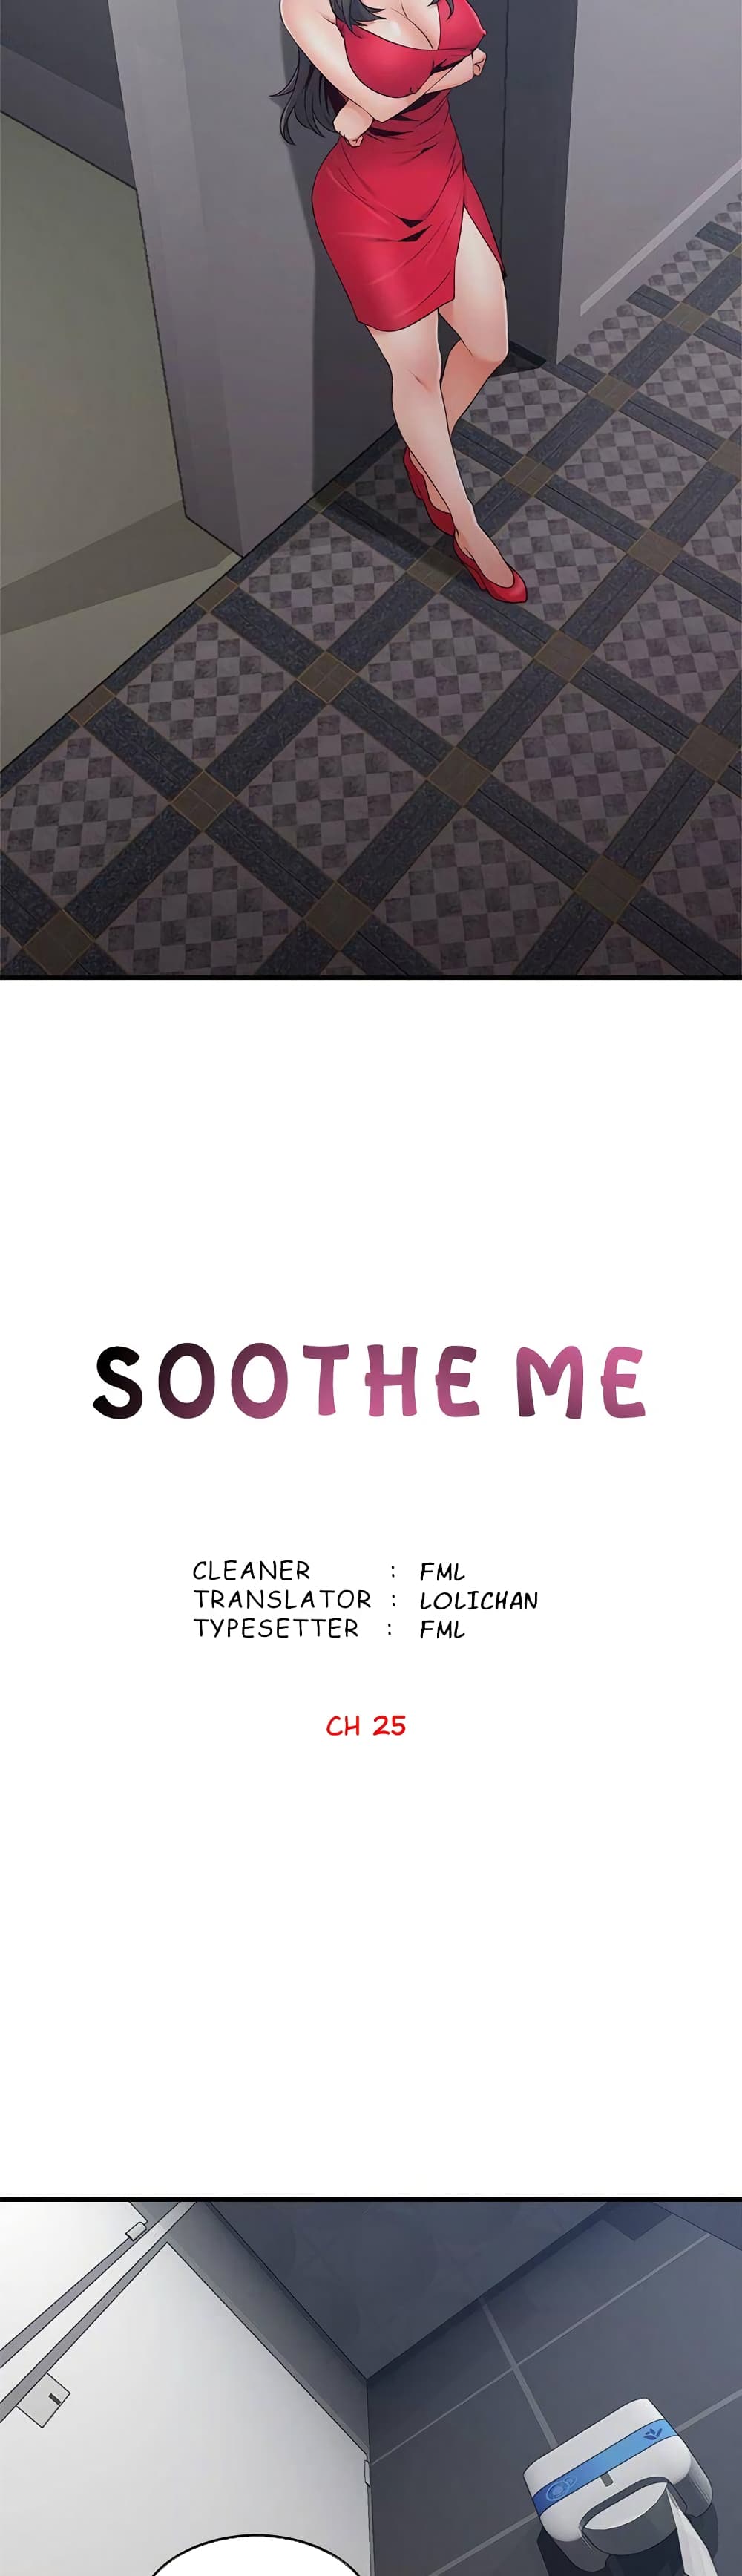 Soothe Me! 25-25